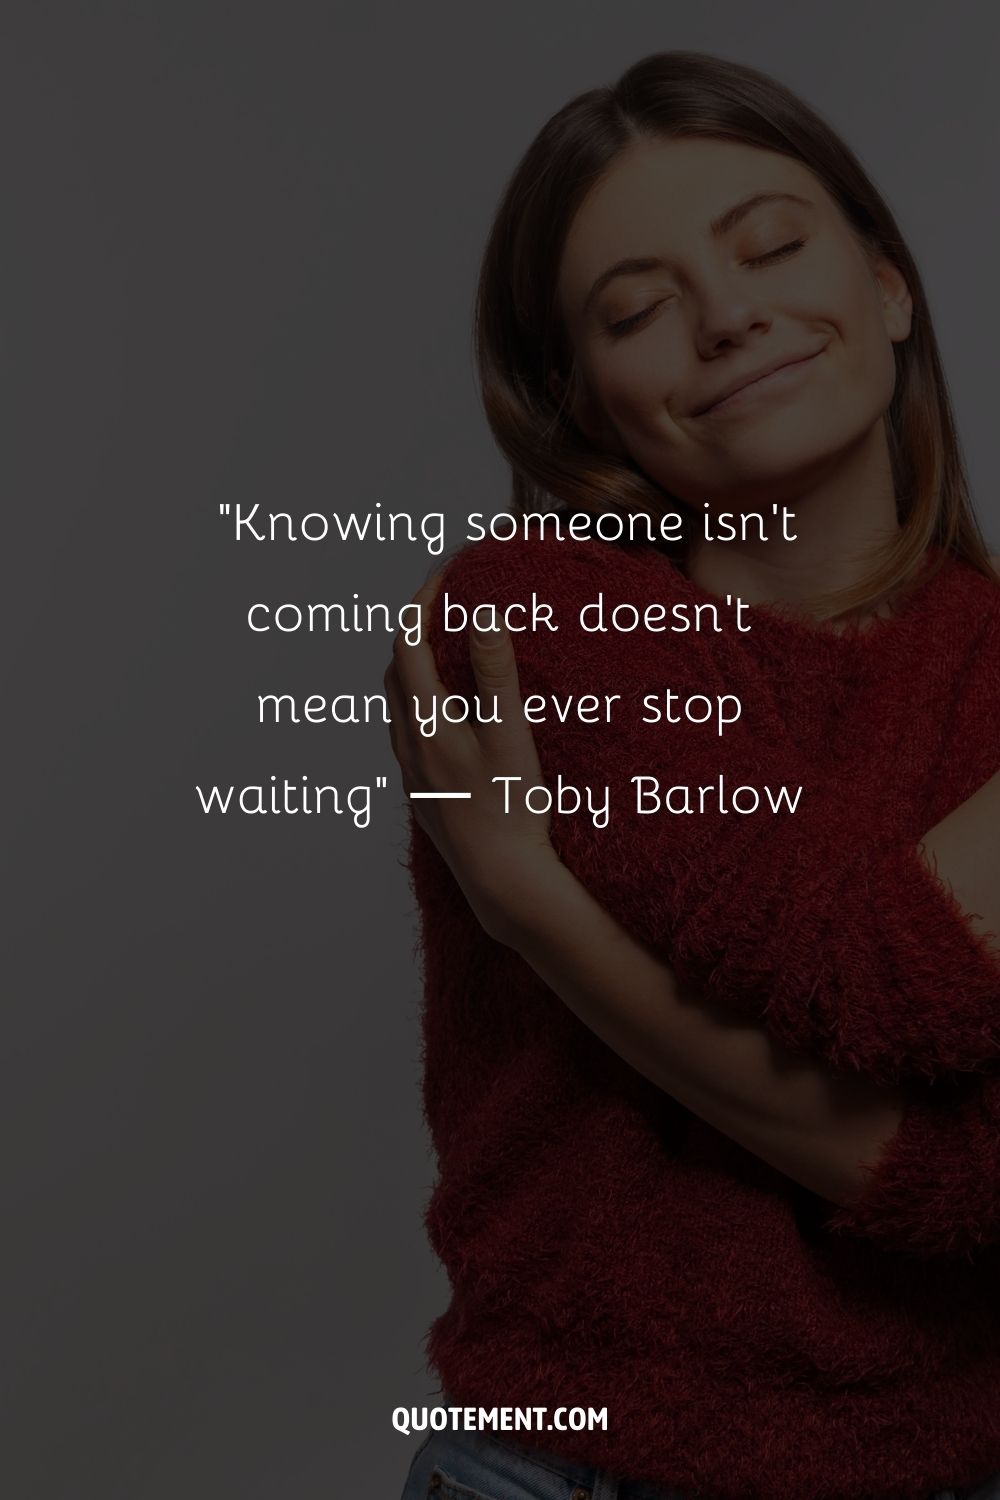 Knowing someone isn't coming back doesn't mean you ever stop waiting